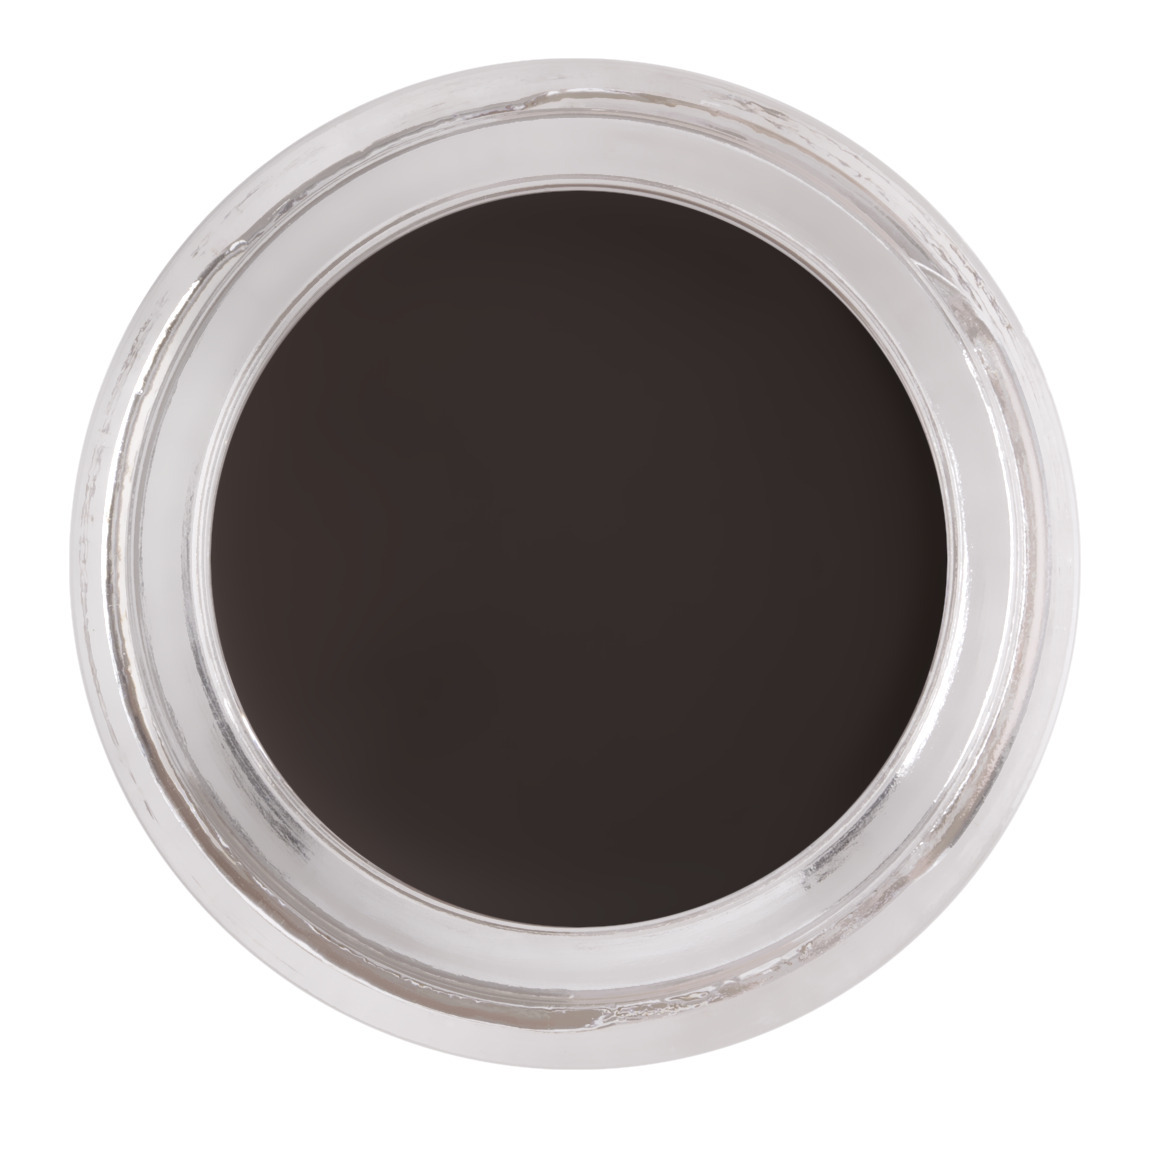 Picture of Anastasia Beverly Hills 245580 Dipbrow Pomade - No.Ebony - 0.14 oz